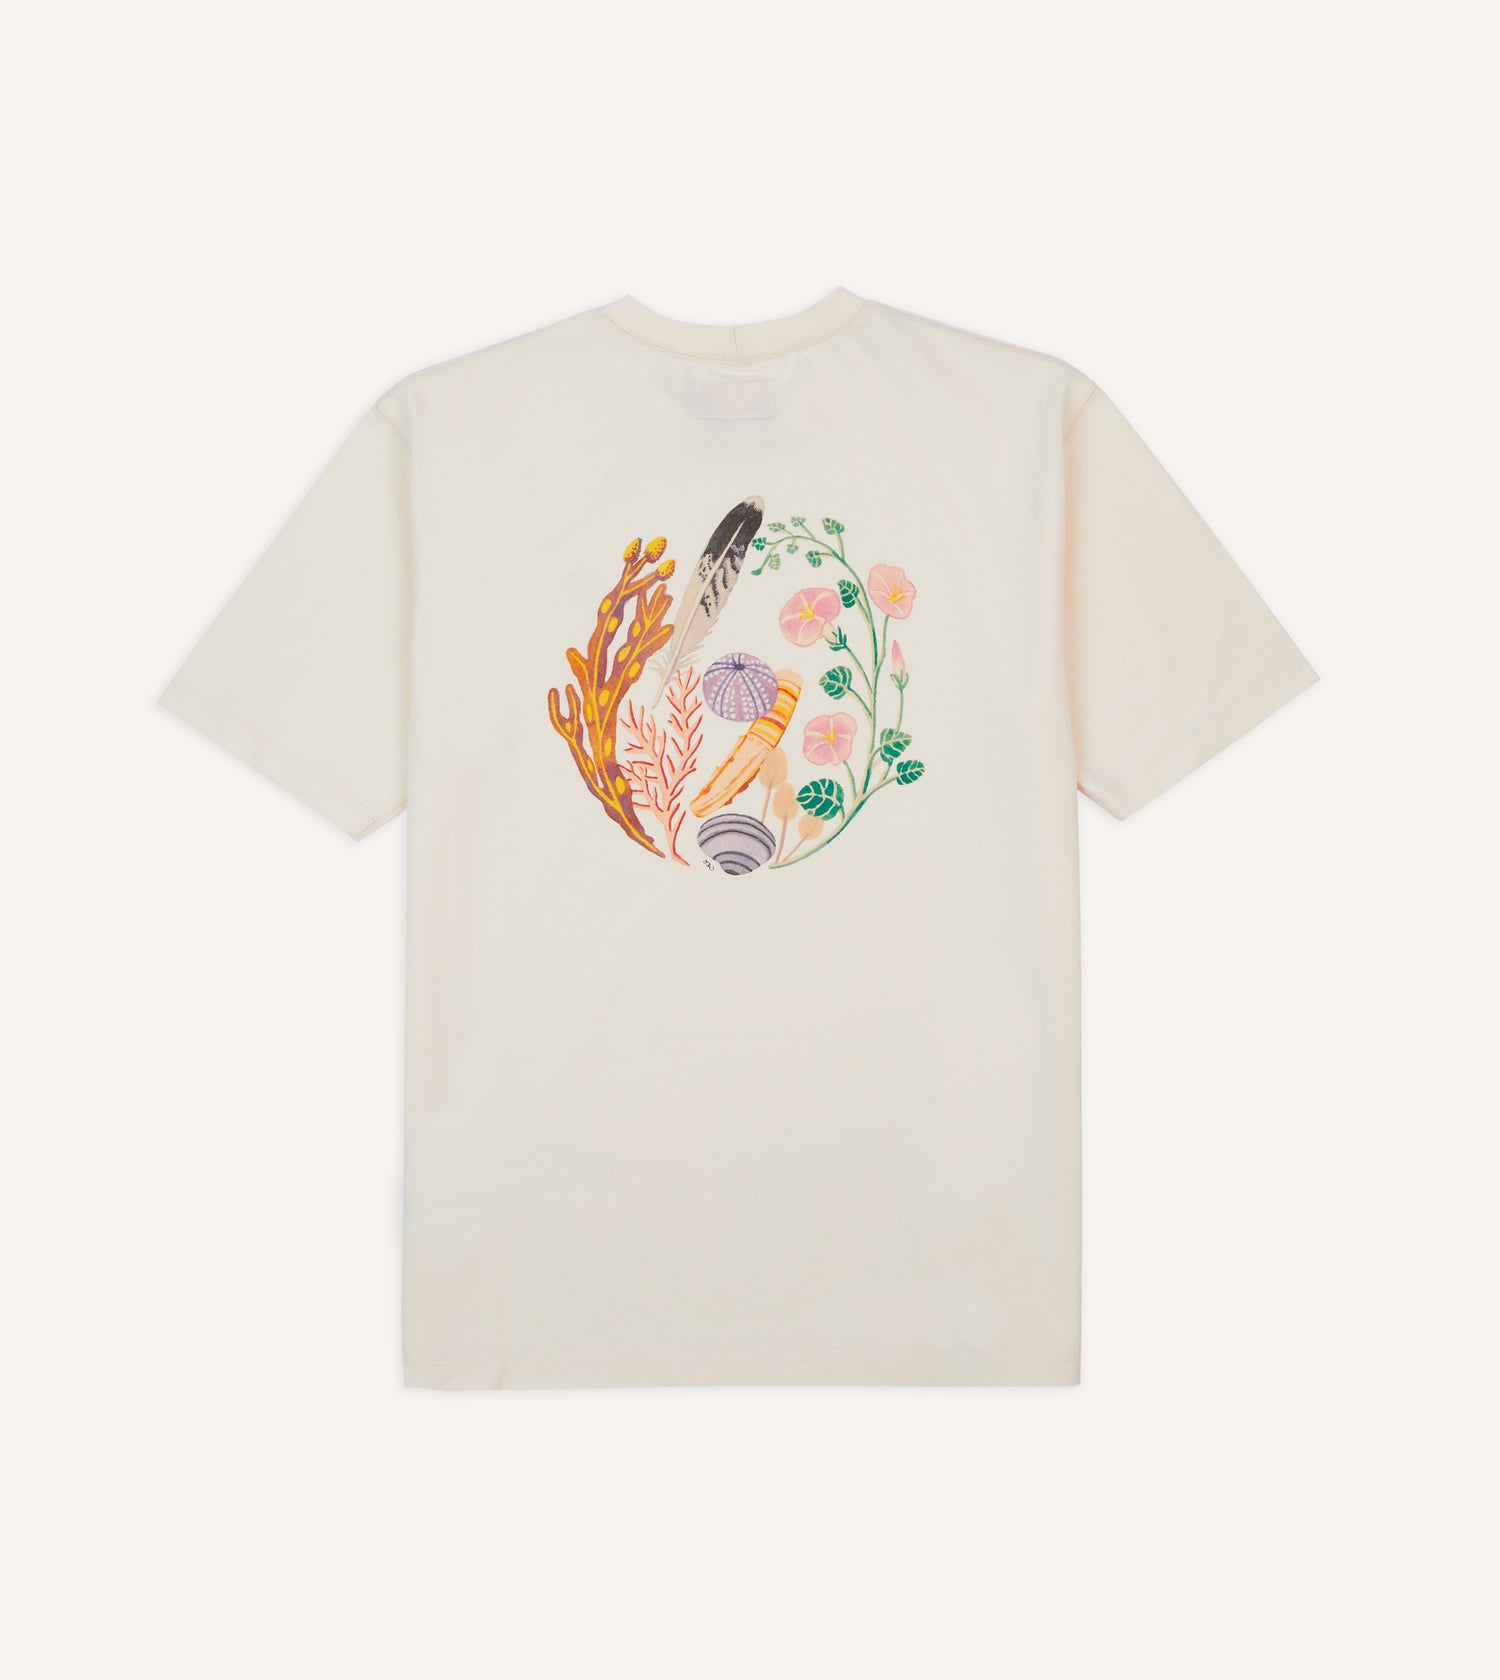 Andreotti & Baribeaud for Drake's 'Jour de Marché' T-Shirt